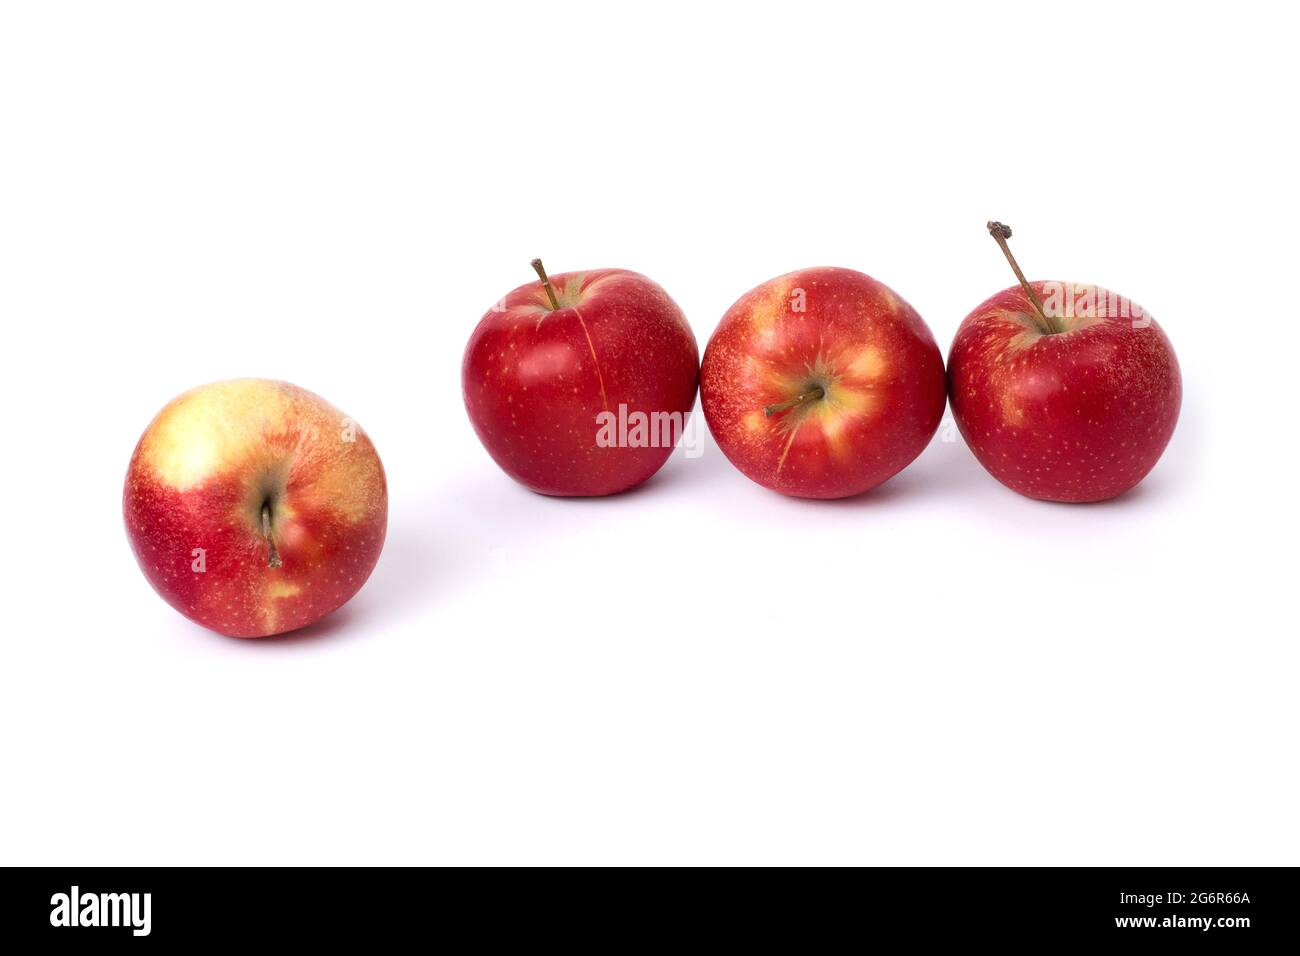 Four red apples on a white background. Juicy apples of red color with yellow specks on a white background. A group of ripe apples on an isolated backg Stock Photo